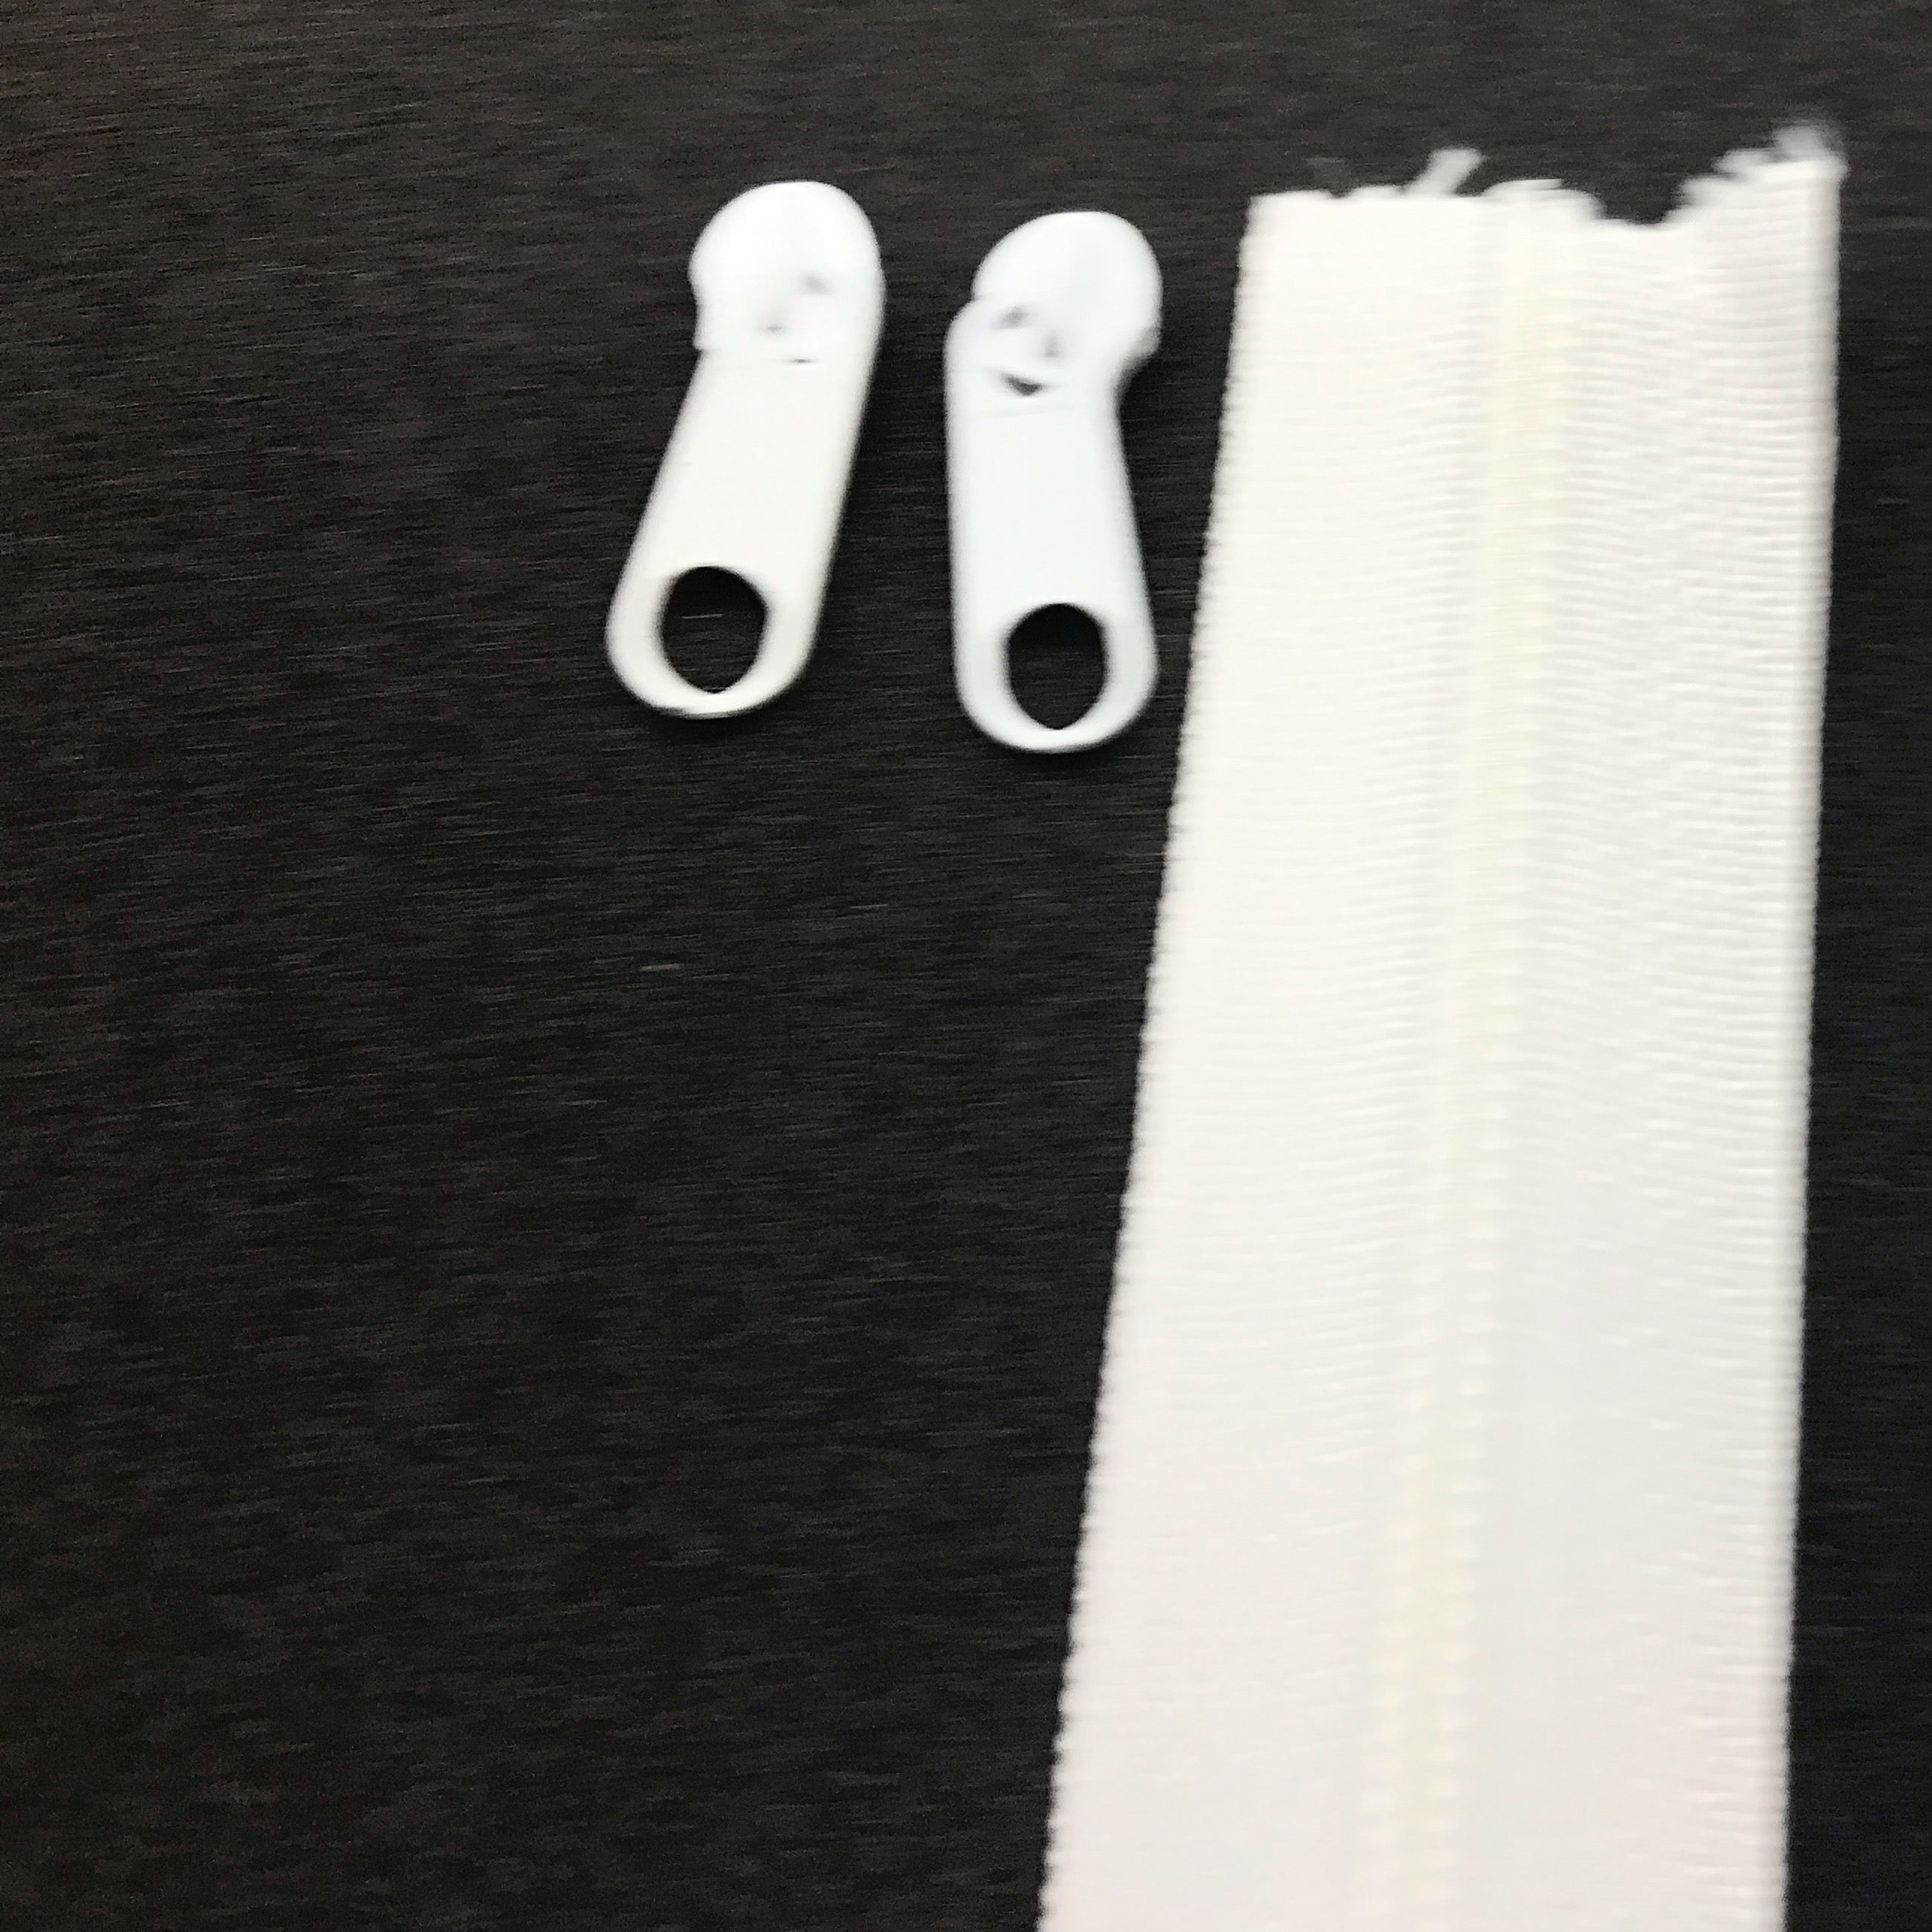 ivory continuous standard long chain zipper tape